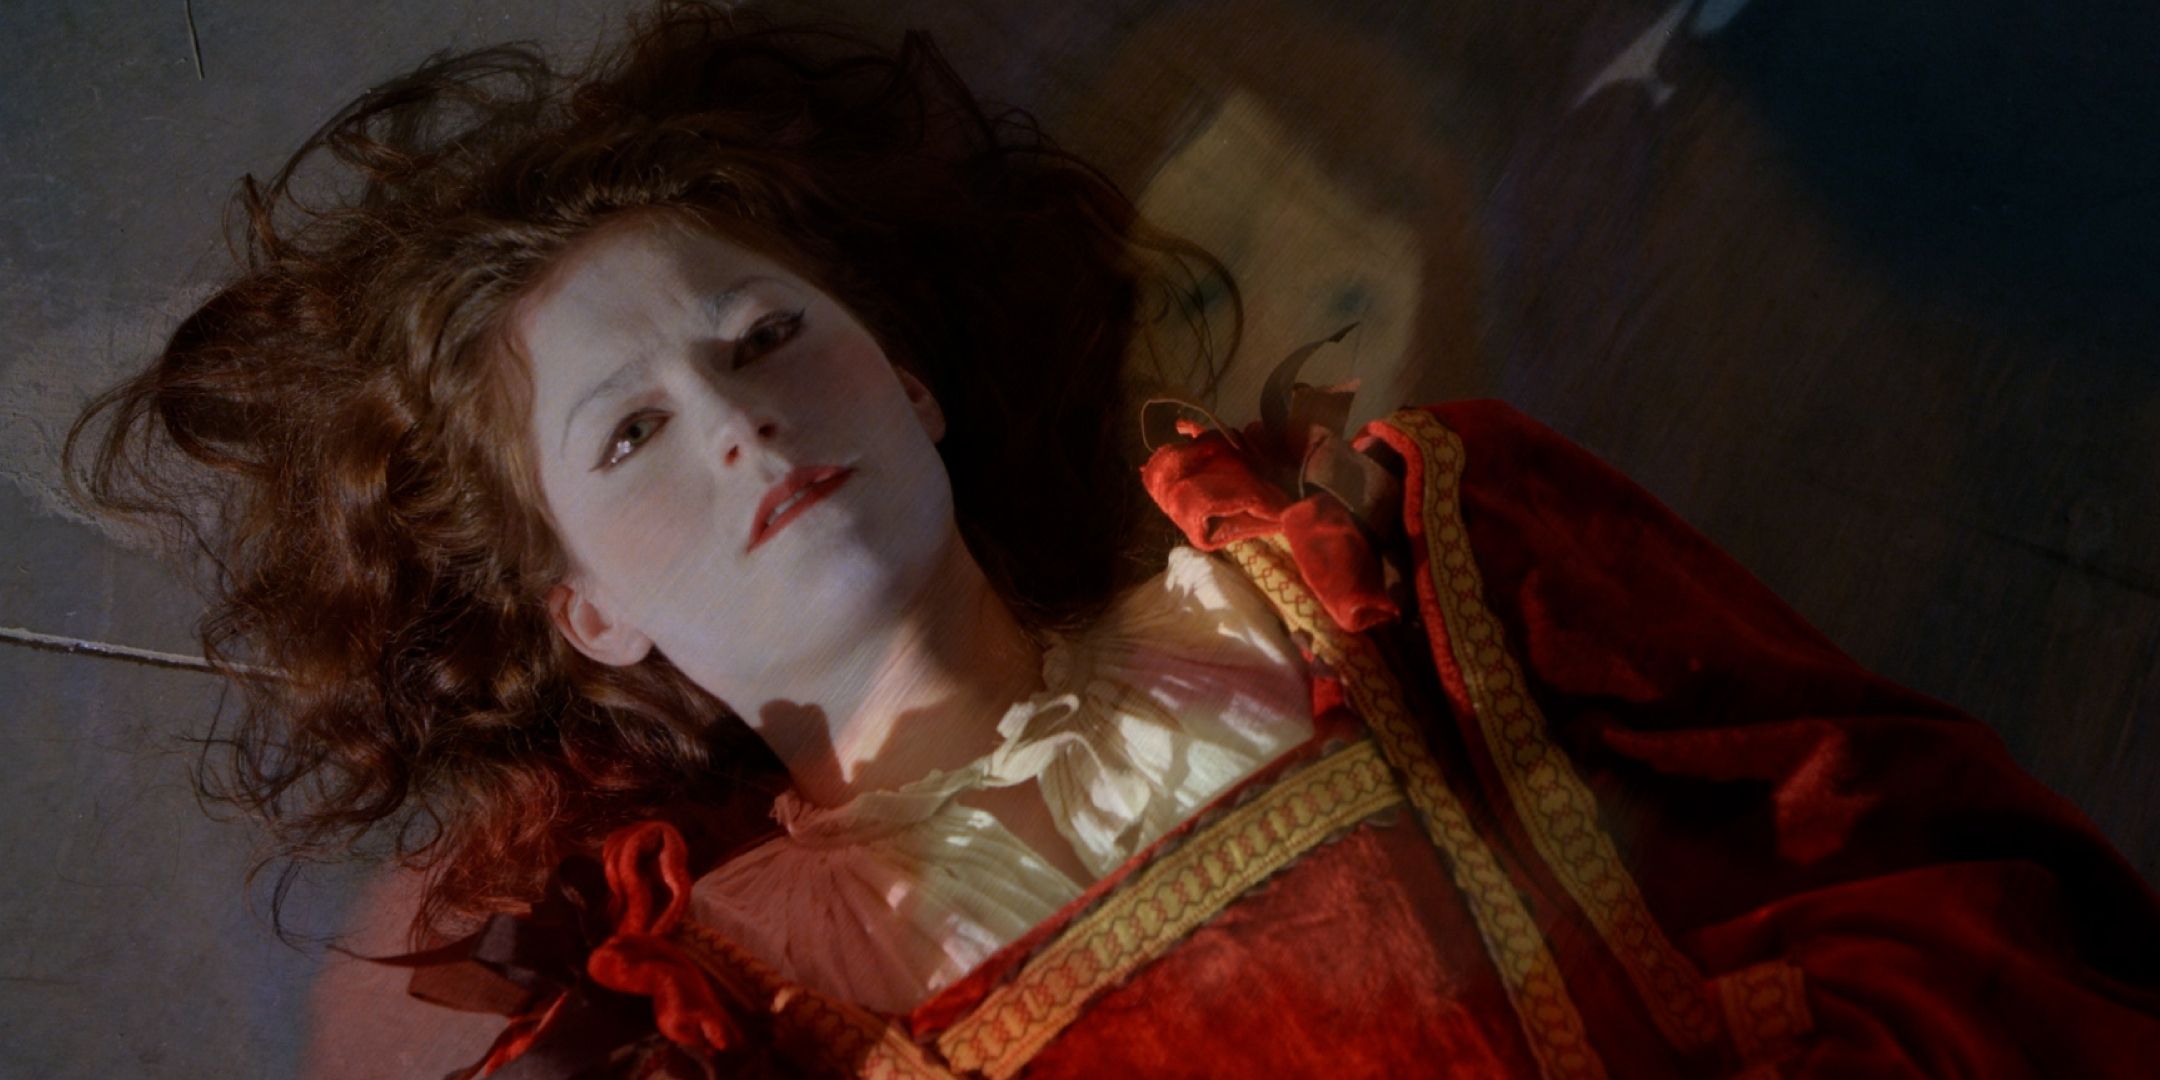 A woman dressed in a Renaissance dress and white face paint lies on the ground in Criminal Minds "Heathridge Manor."